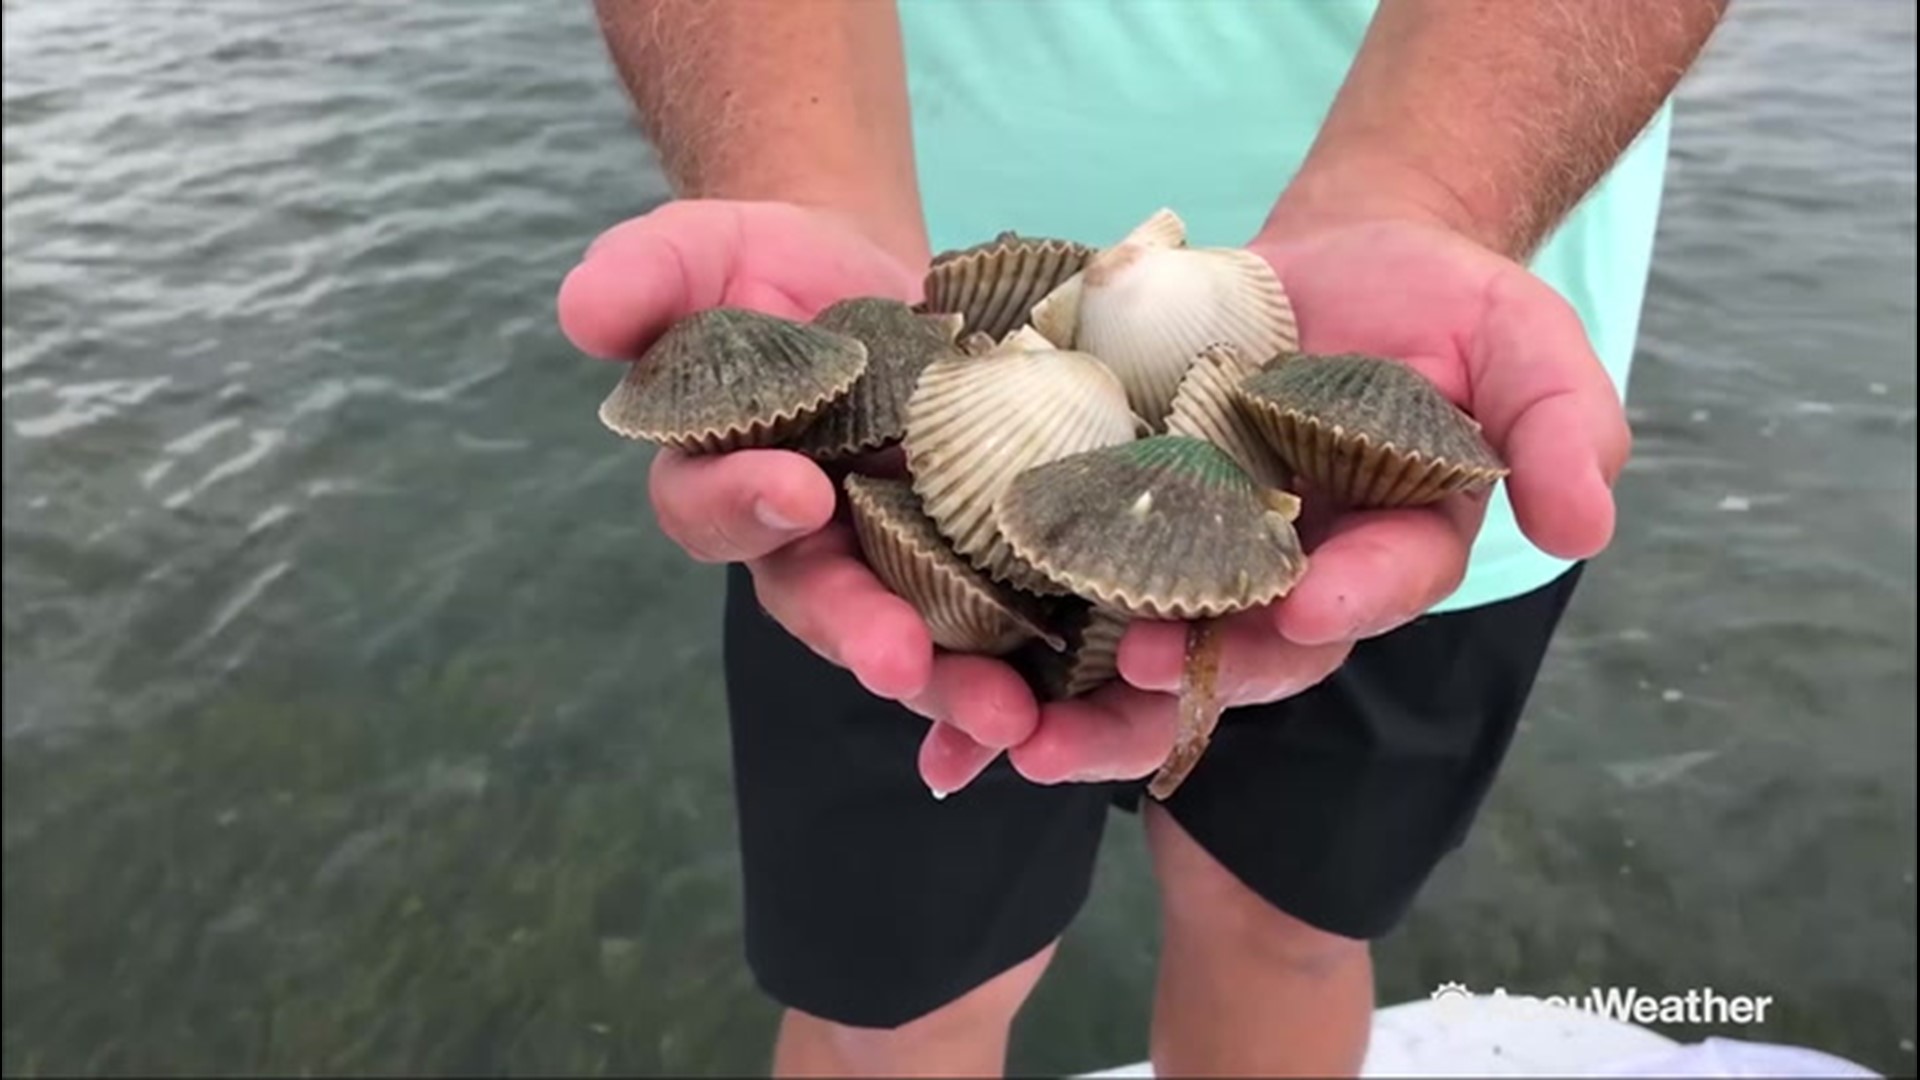 Bad Scallop Season | wwltv.com How To Tell When Scallops Are Bad